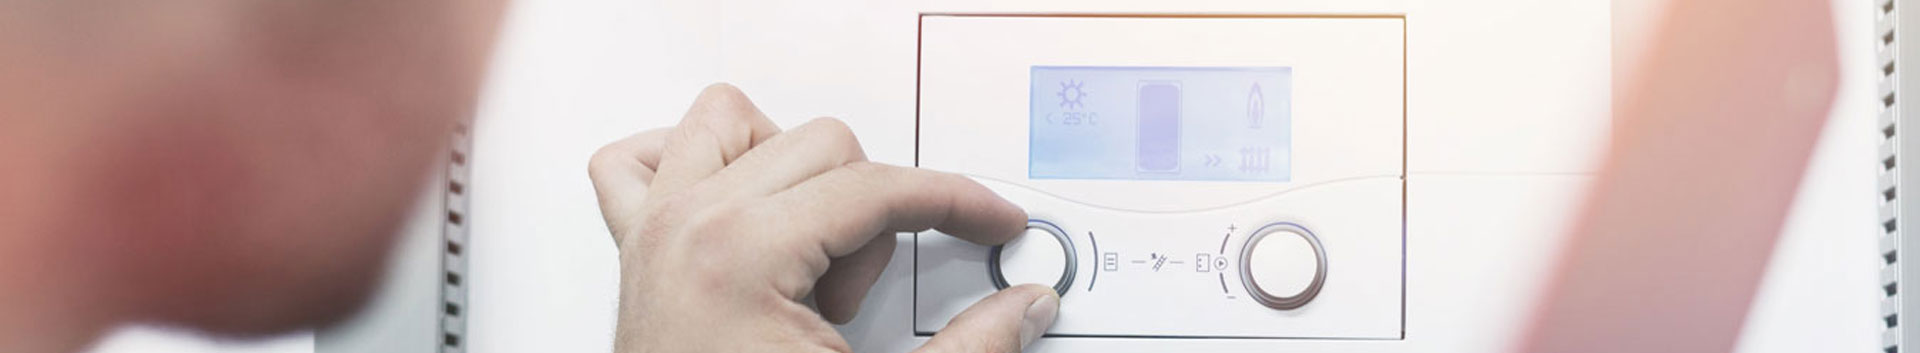 Photo of person adjusting thermostat